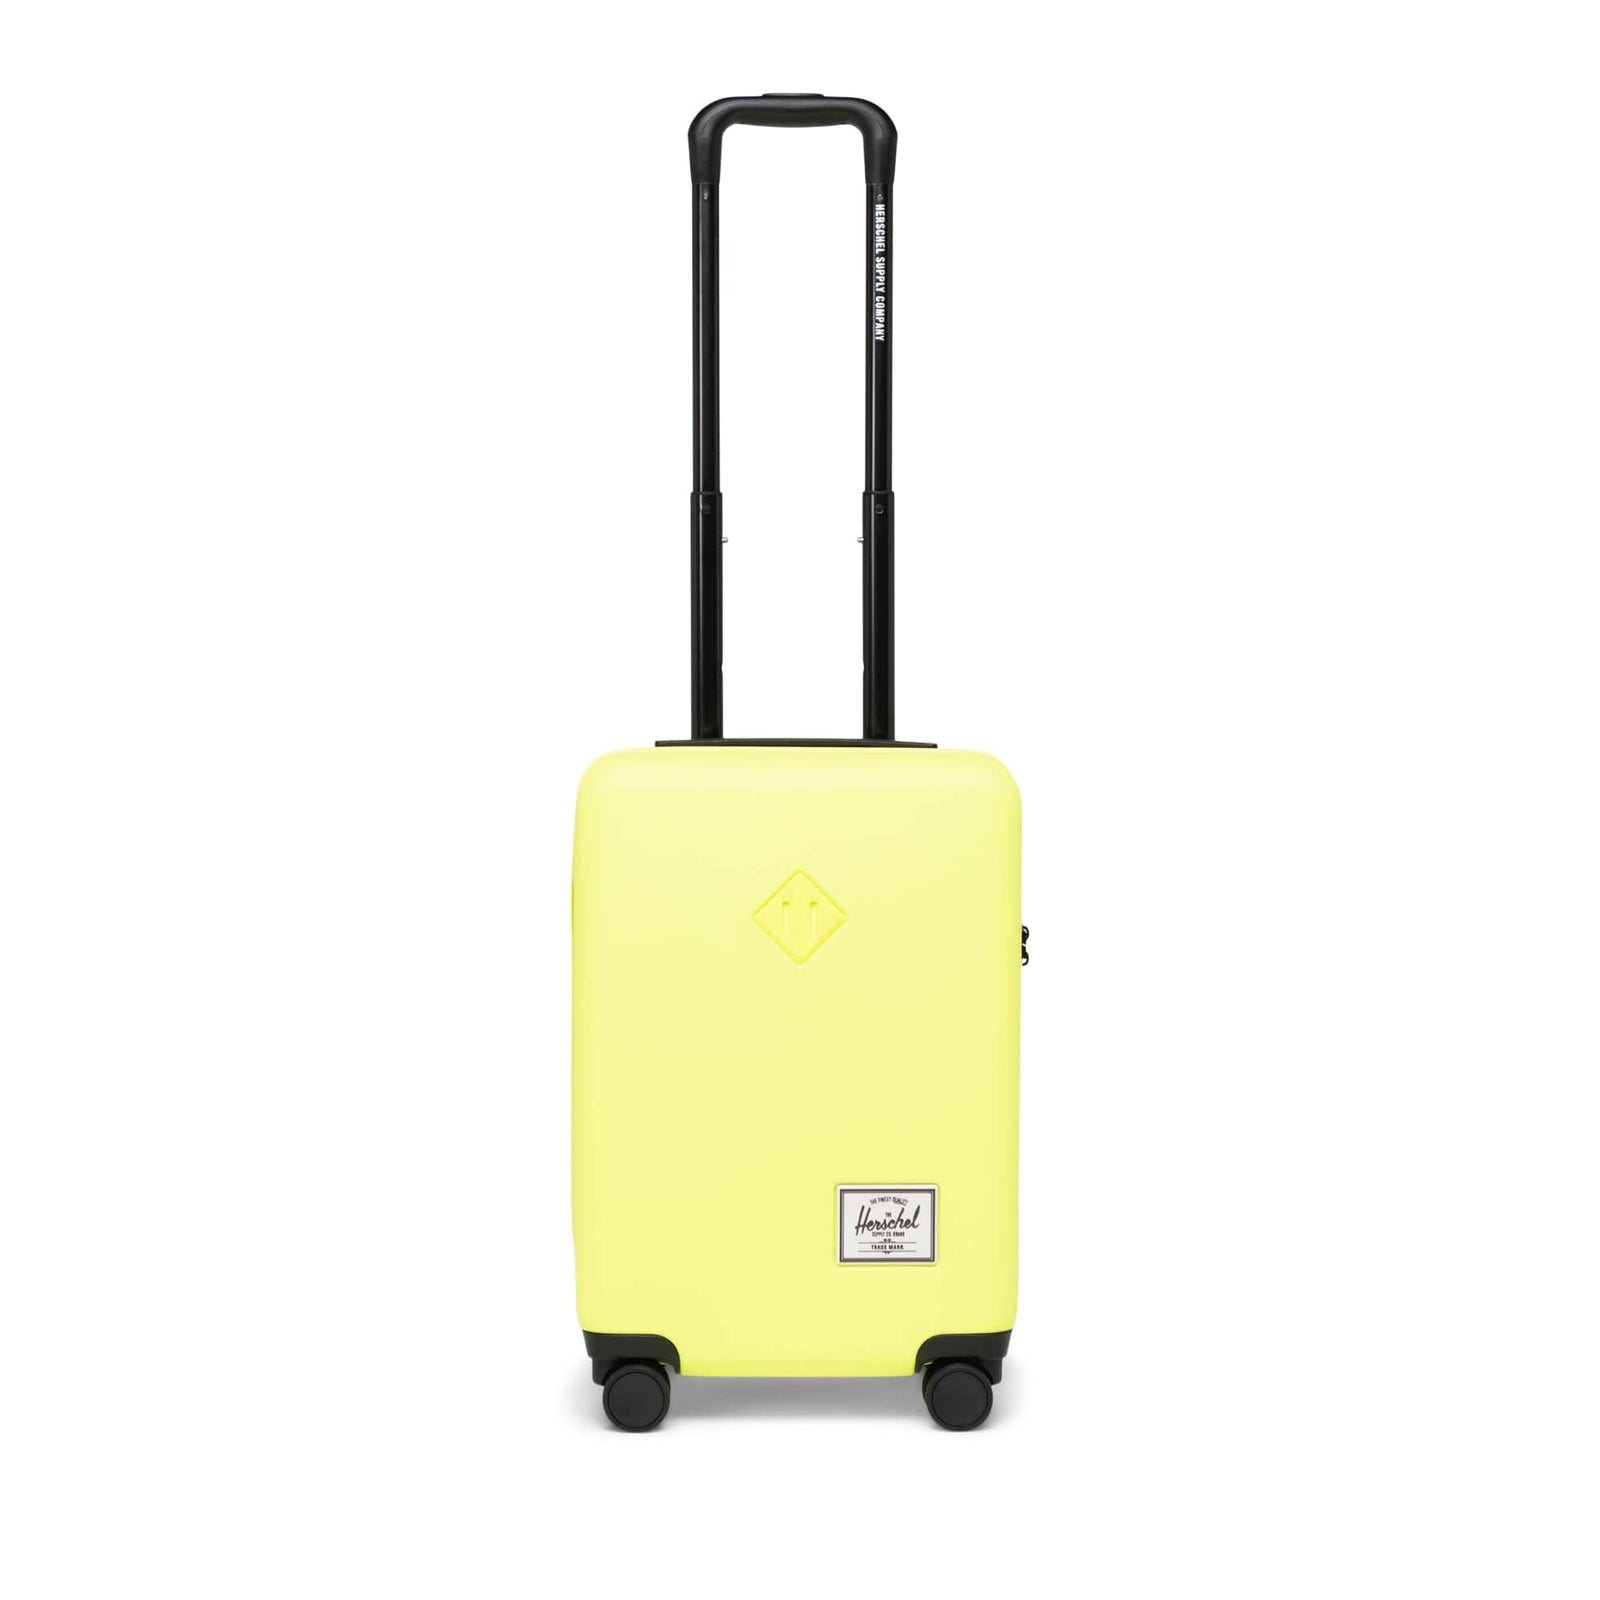 Herschel Supply Co. Heritage Hardshell Carry On Luggage 50cm in Safety Yellow